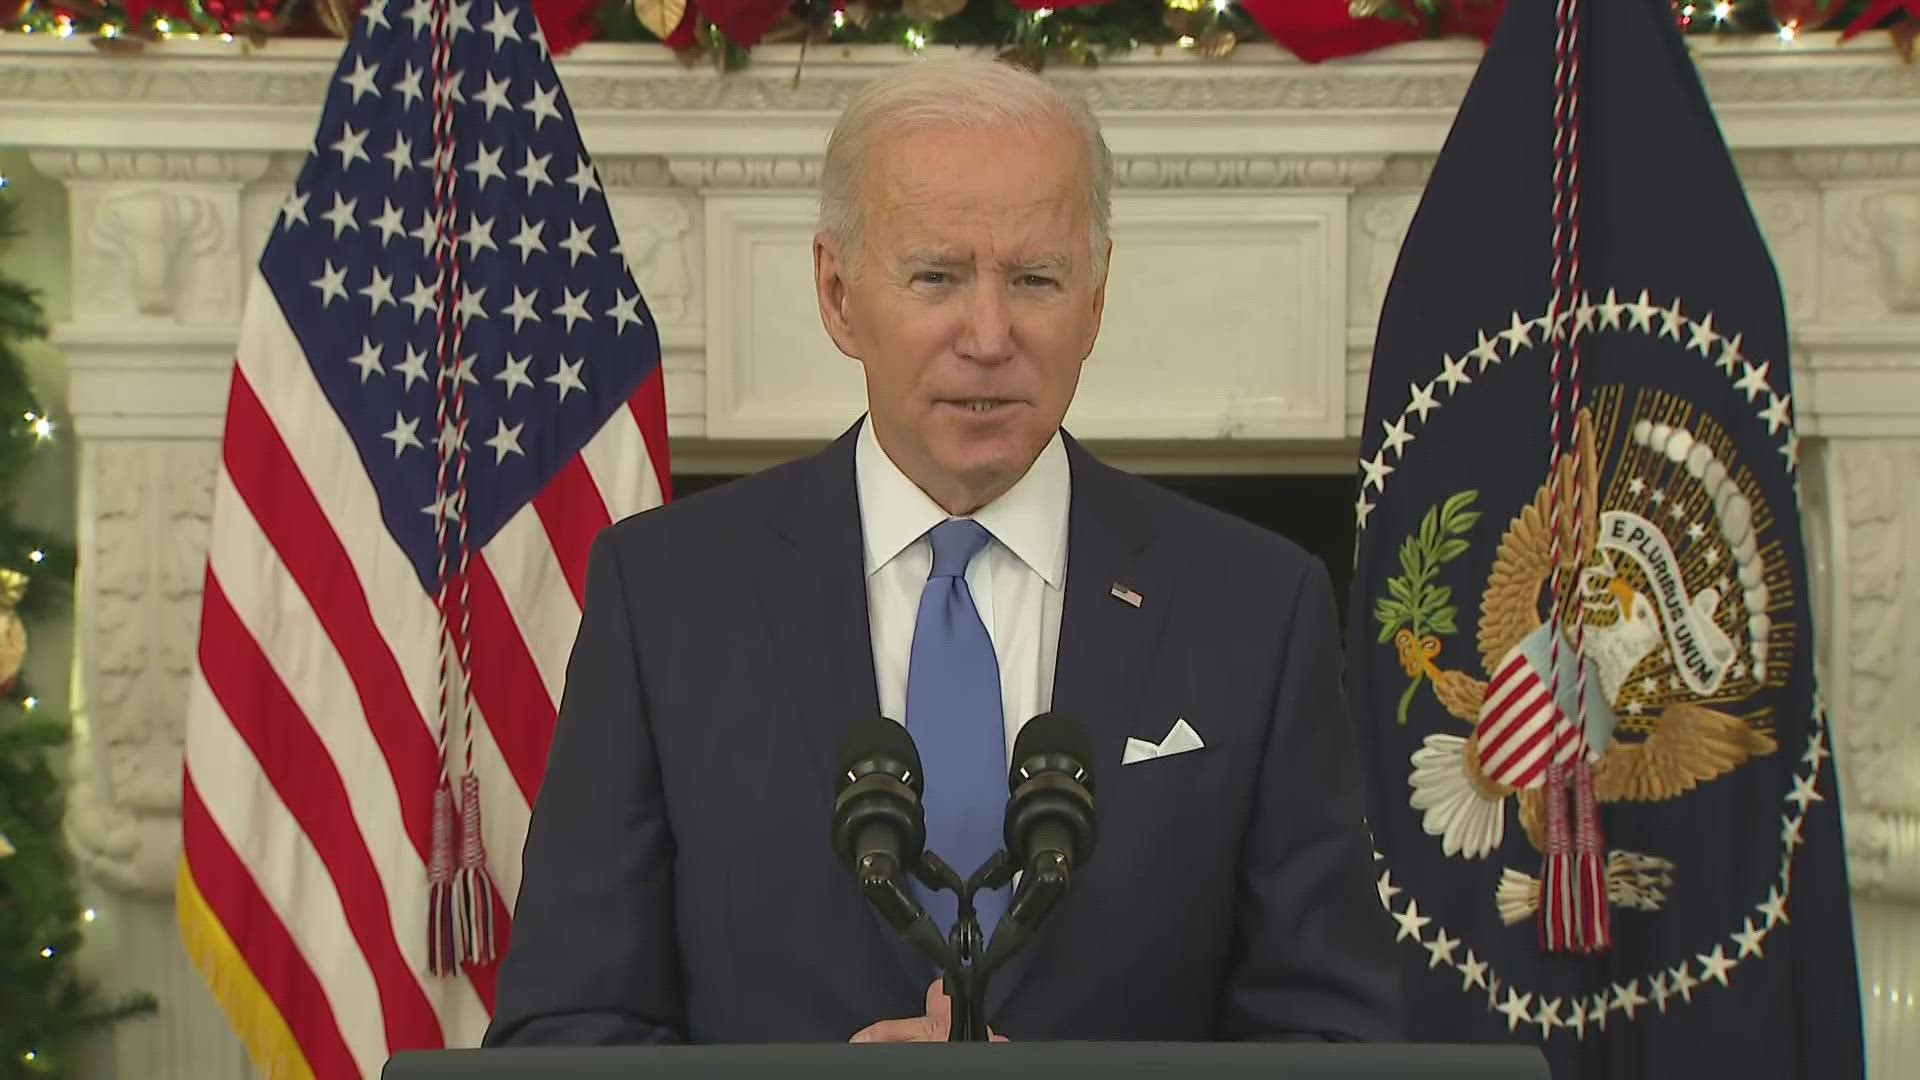 Biden said the tests will be available for free starting in January.